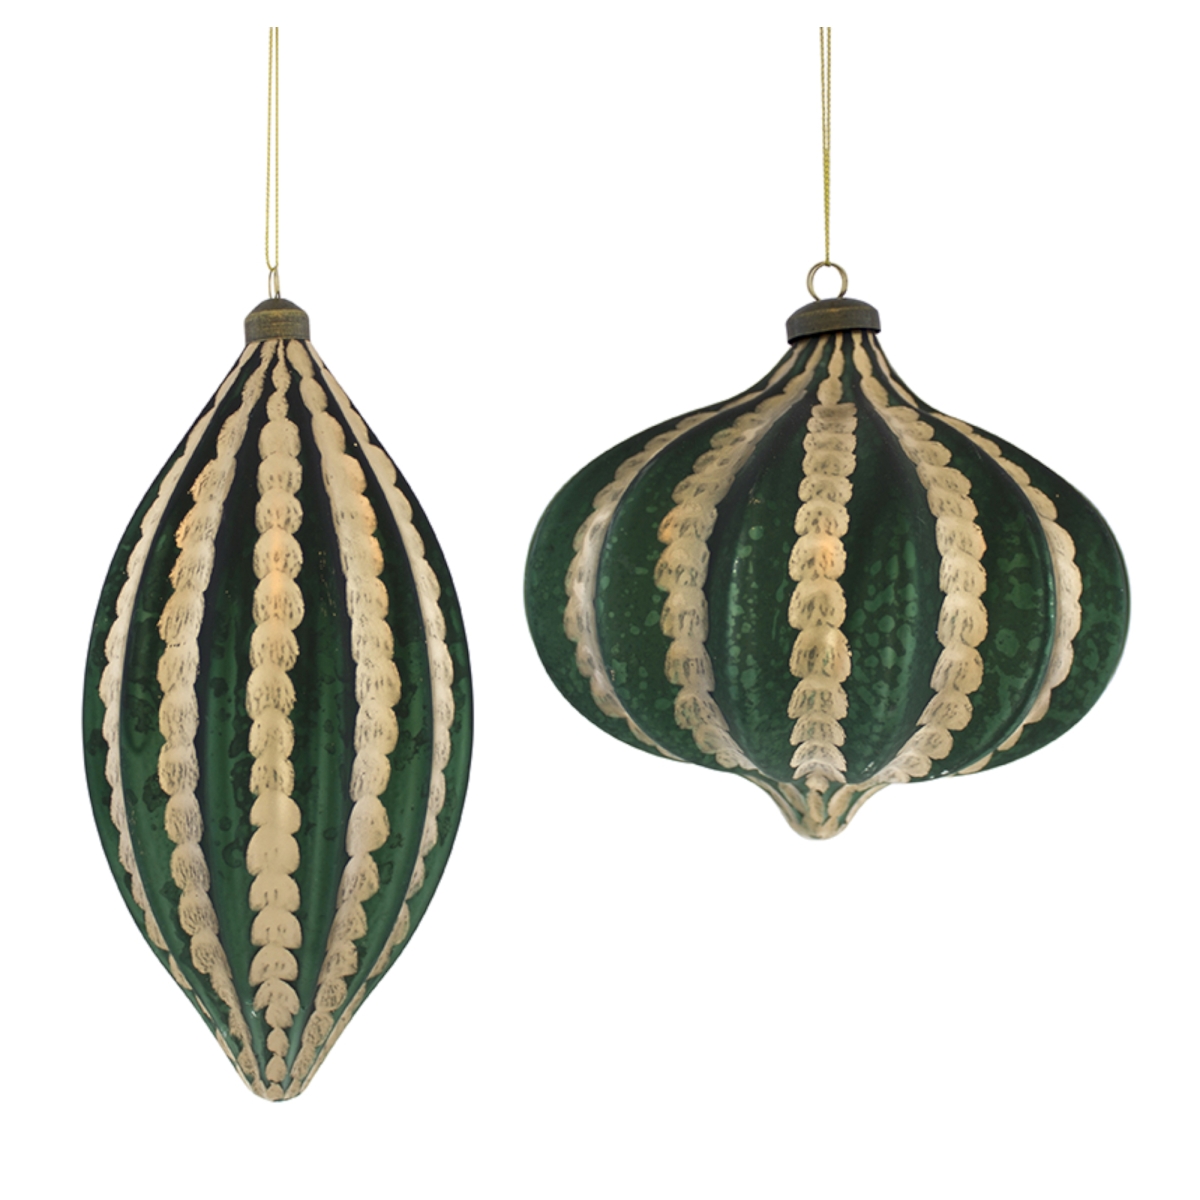 73088ds 6.75-10.5 In. Glass Ornament, Green & Gold - Set Of 4